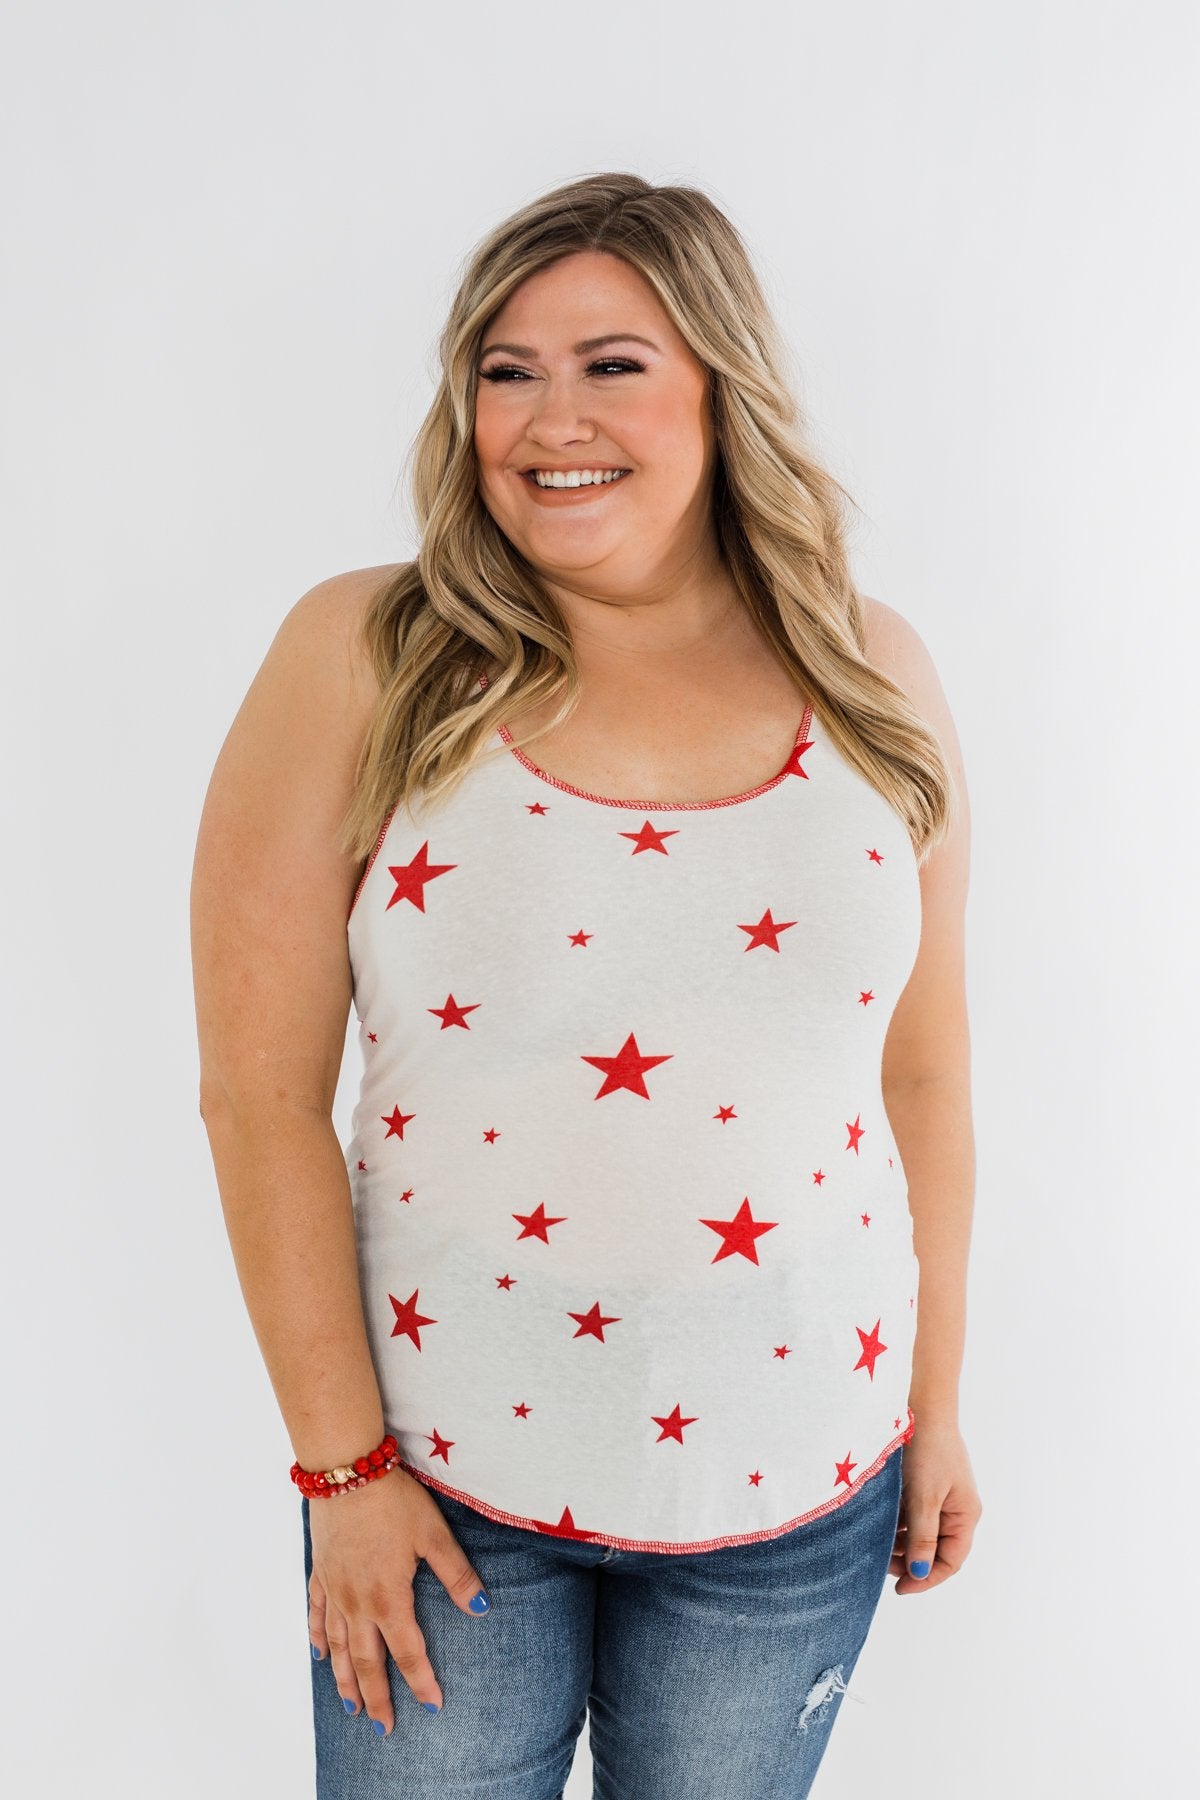 Oh My Stars Printed Tank Top- Ivory & Red